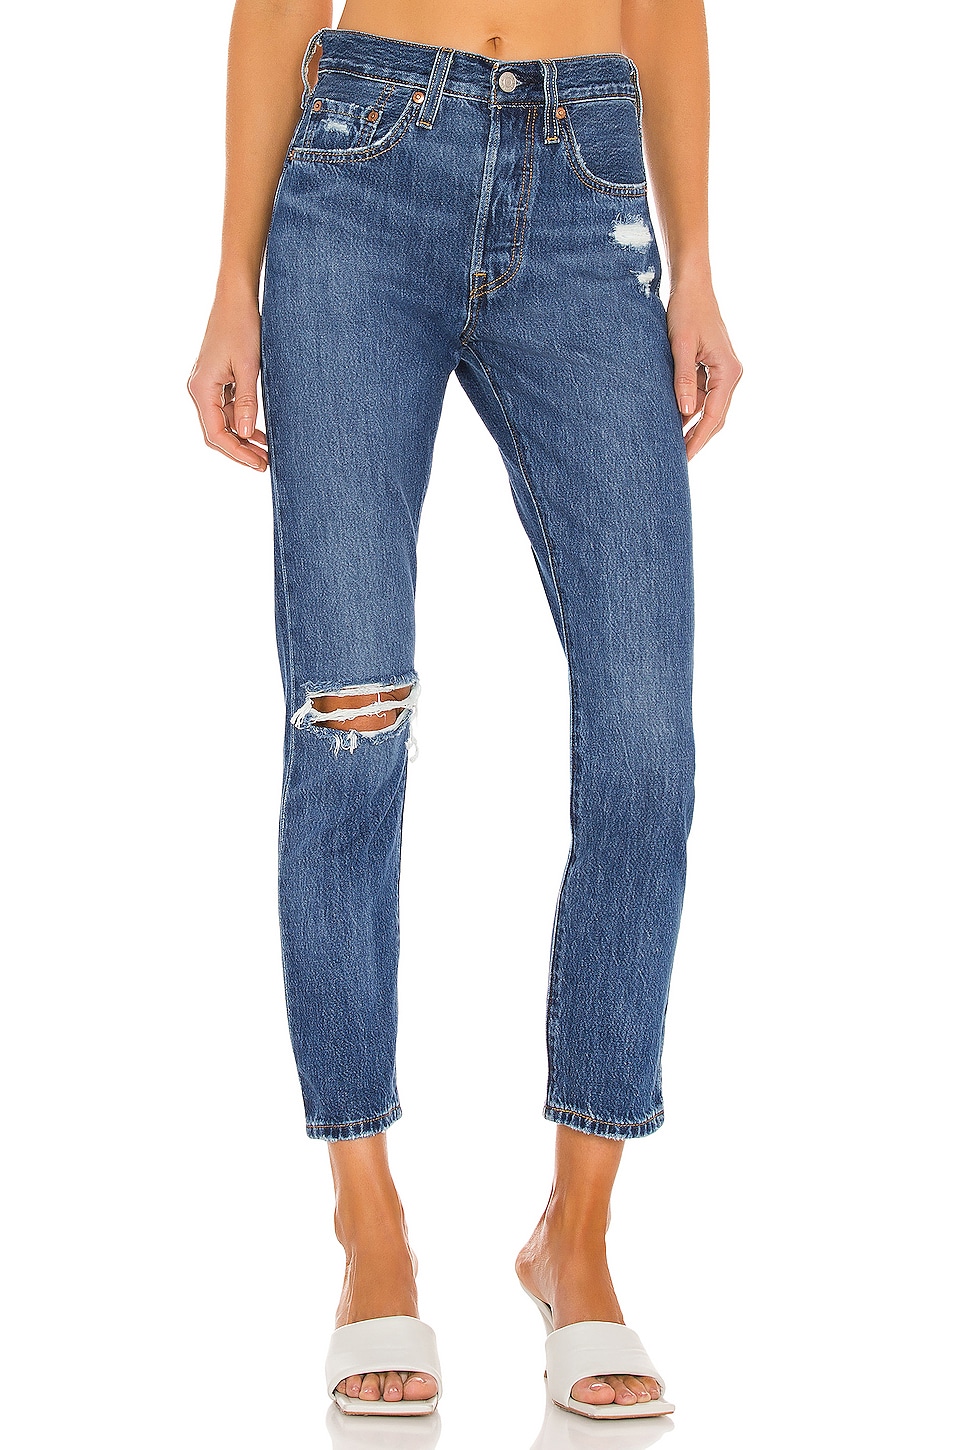 Ouille! 45+ Raisons pour Levis 501 Skinny Femme! We would like to show ...